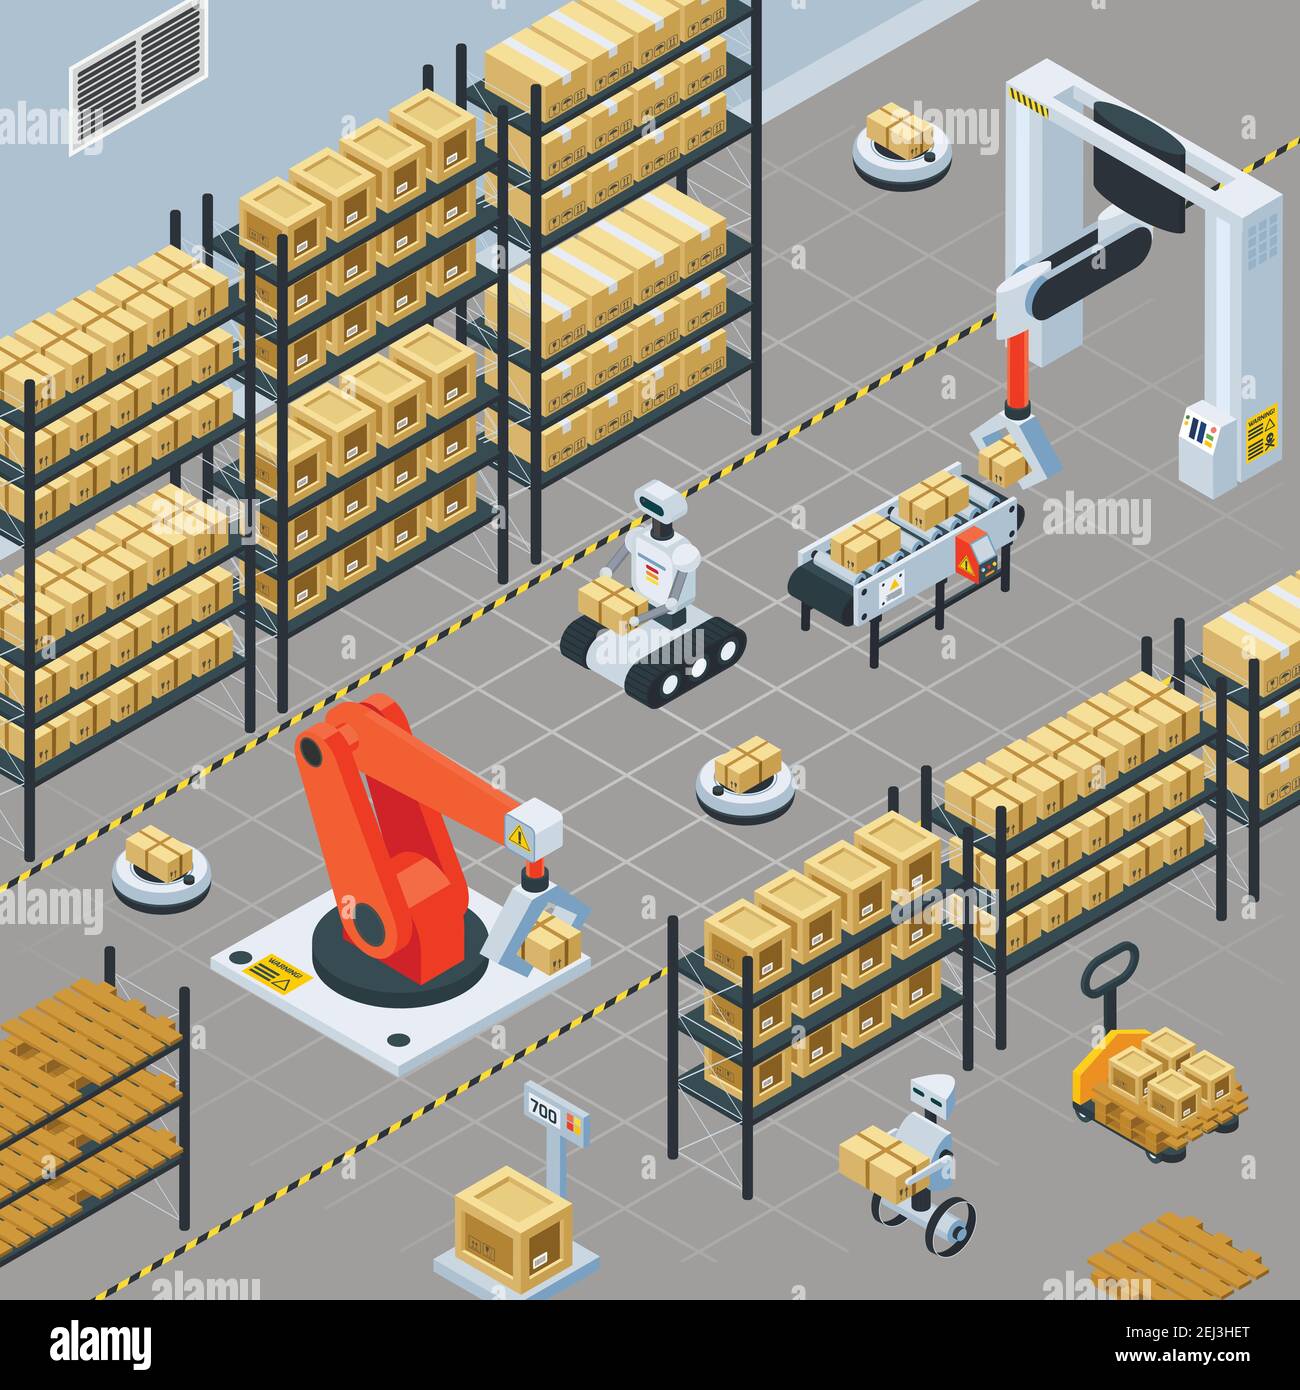 Automatic logistics solutions in warehouse facility isometric background with robotic arm gripping and placing packages vector illustration Stock Vector